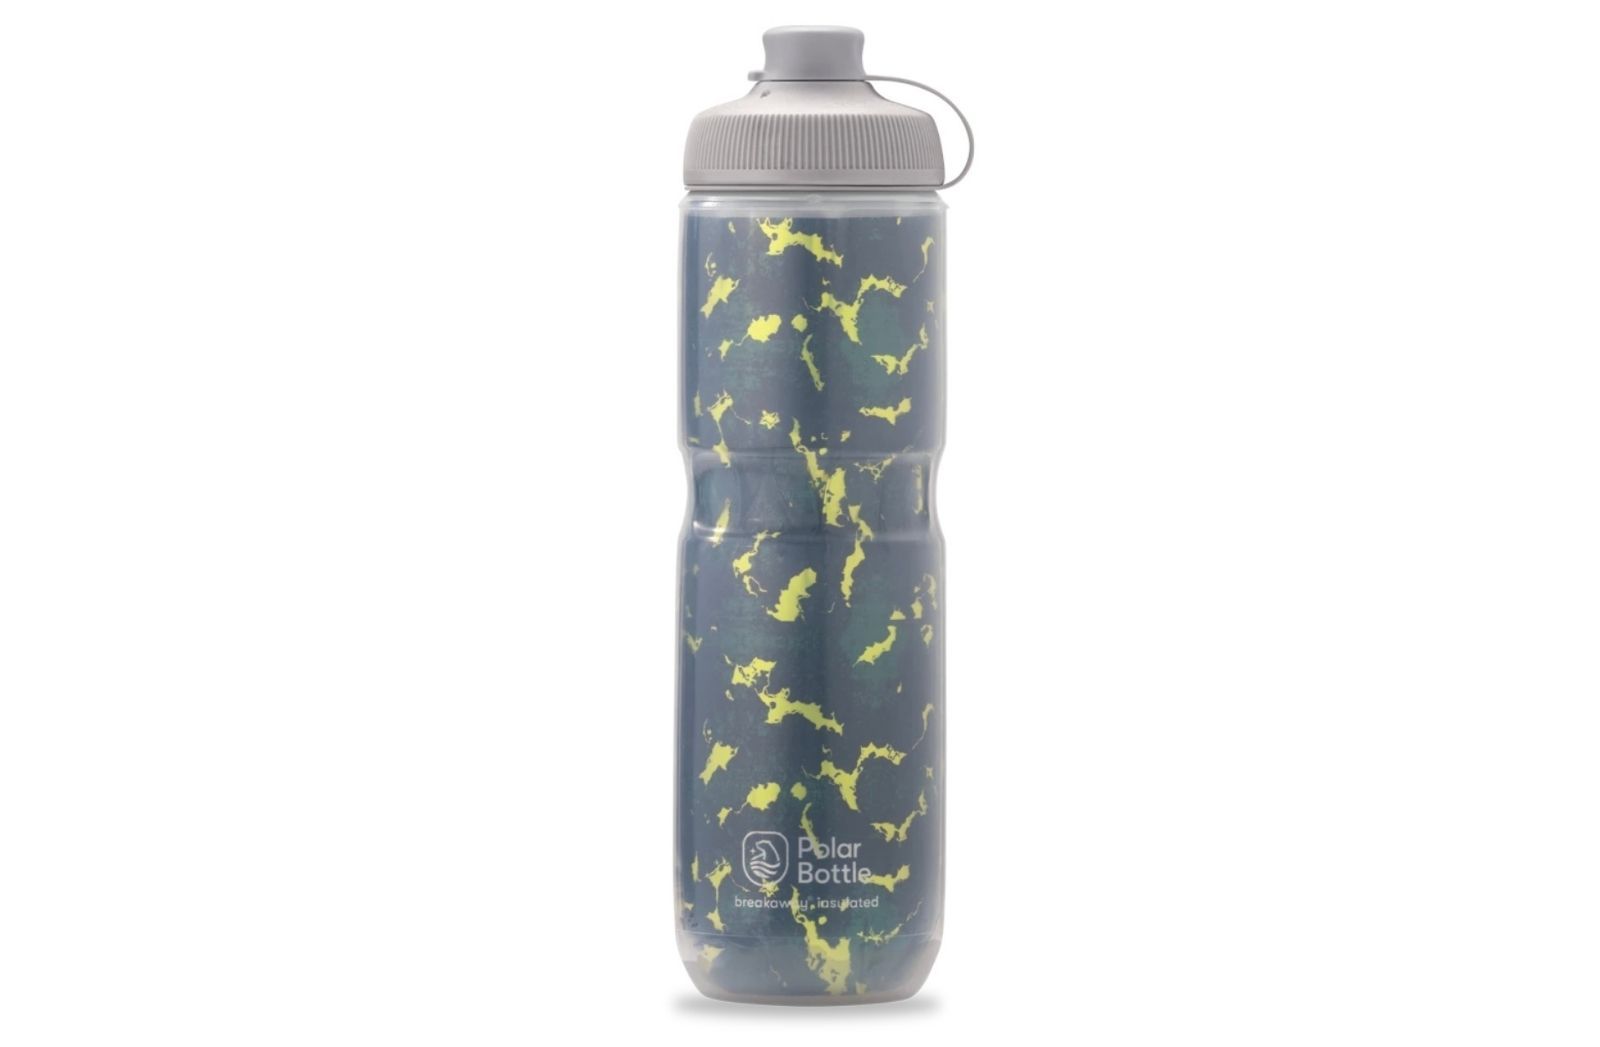 The Best Cycling Water Bottles of 2021 for Your Next Riding